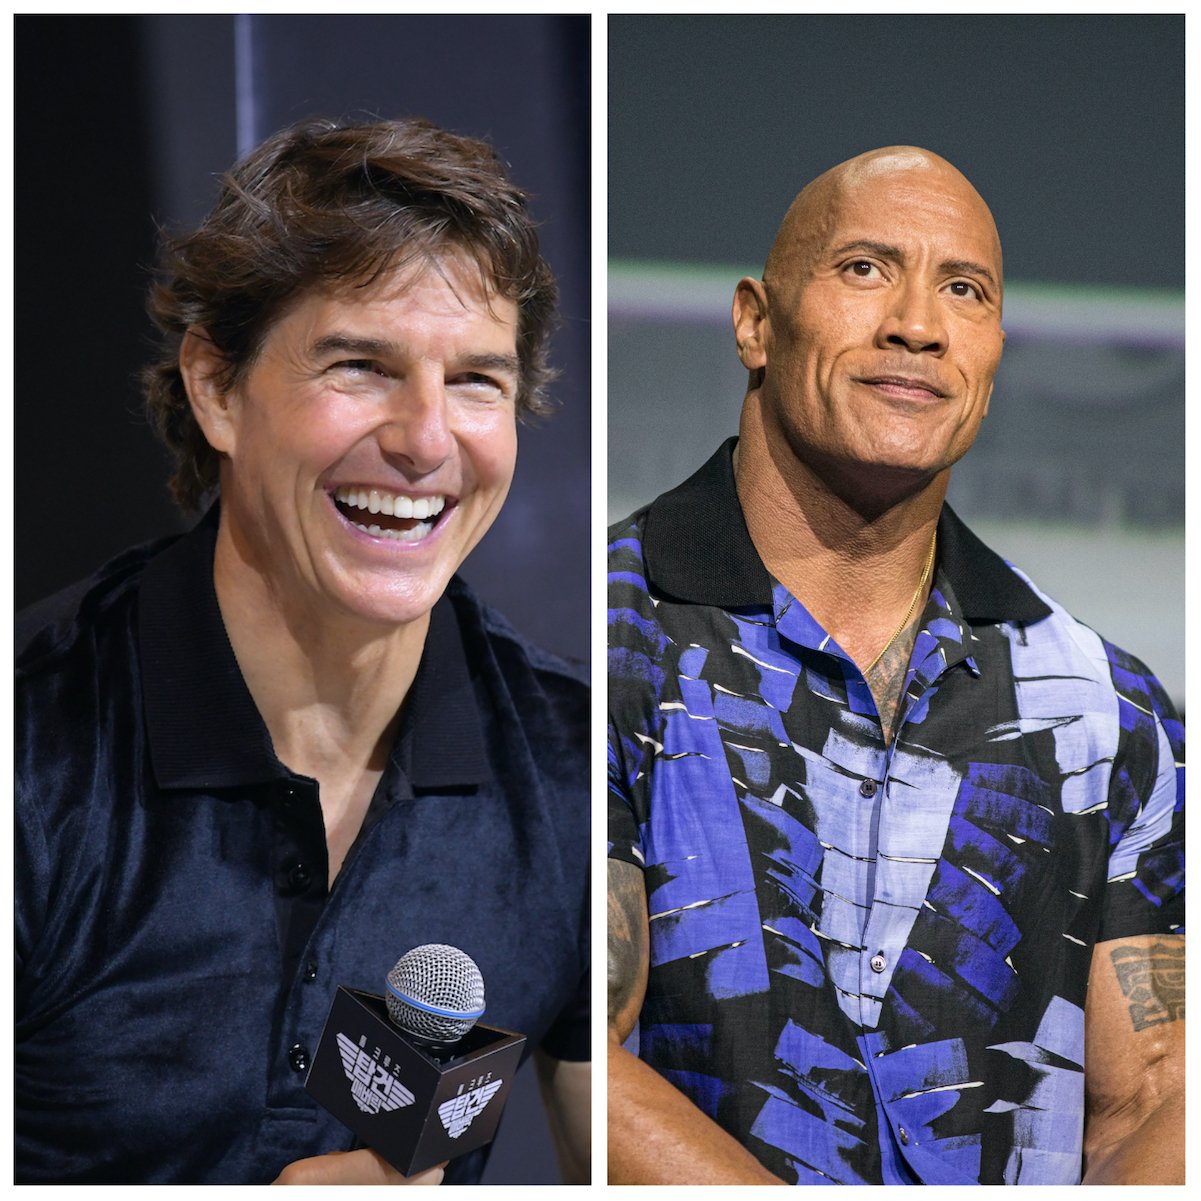 Tom Cruise and Dwayne Johnson, who both have a high net worth, are photographed at different events